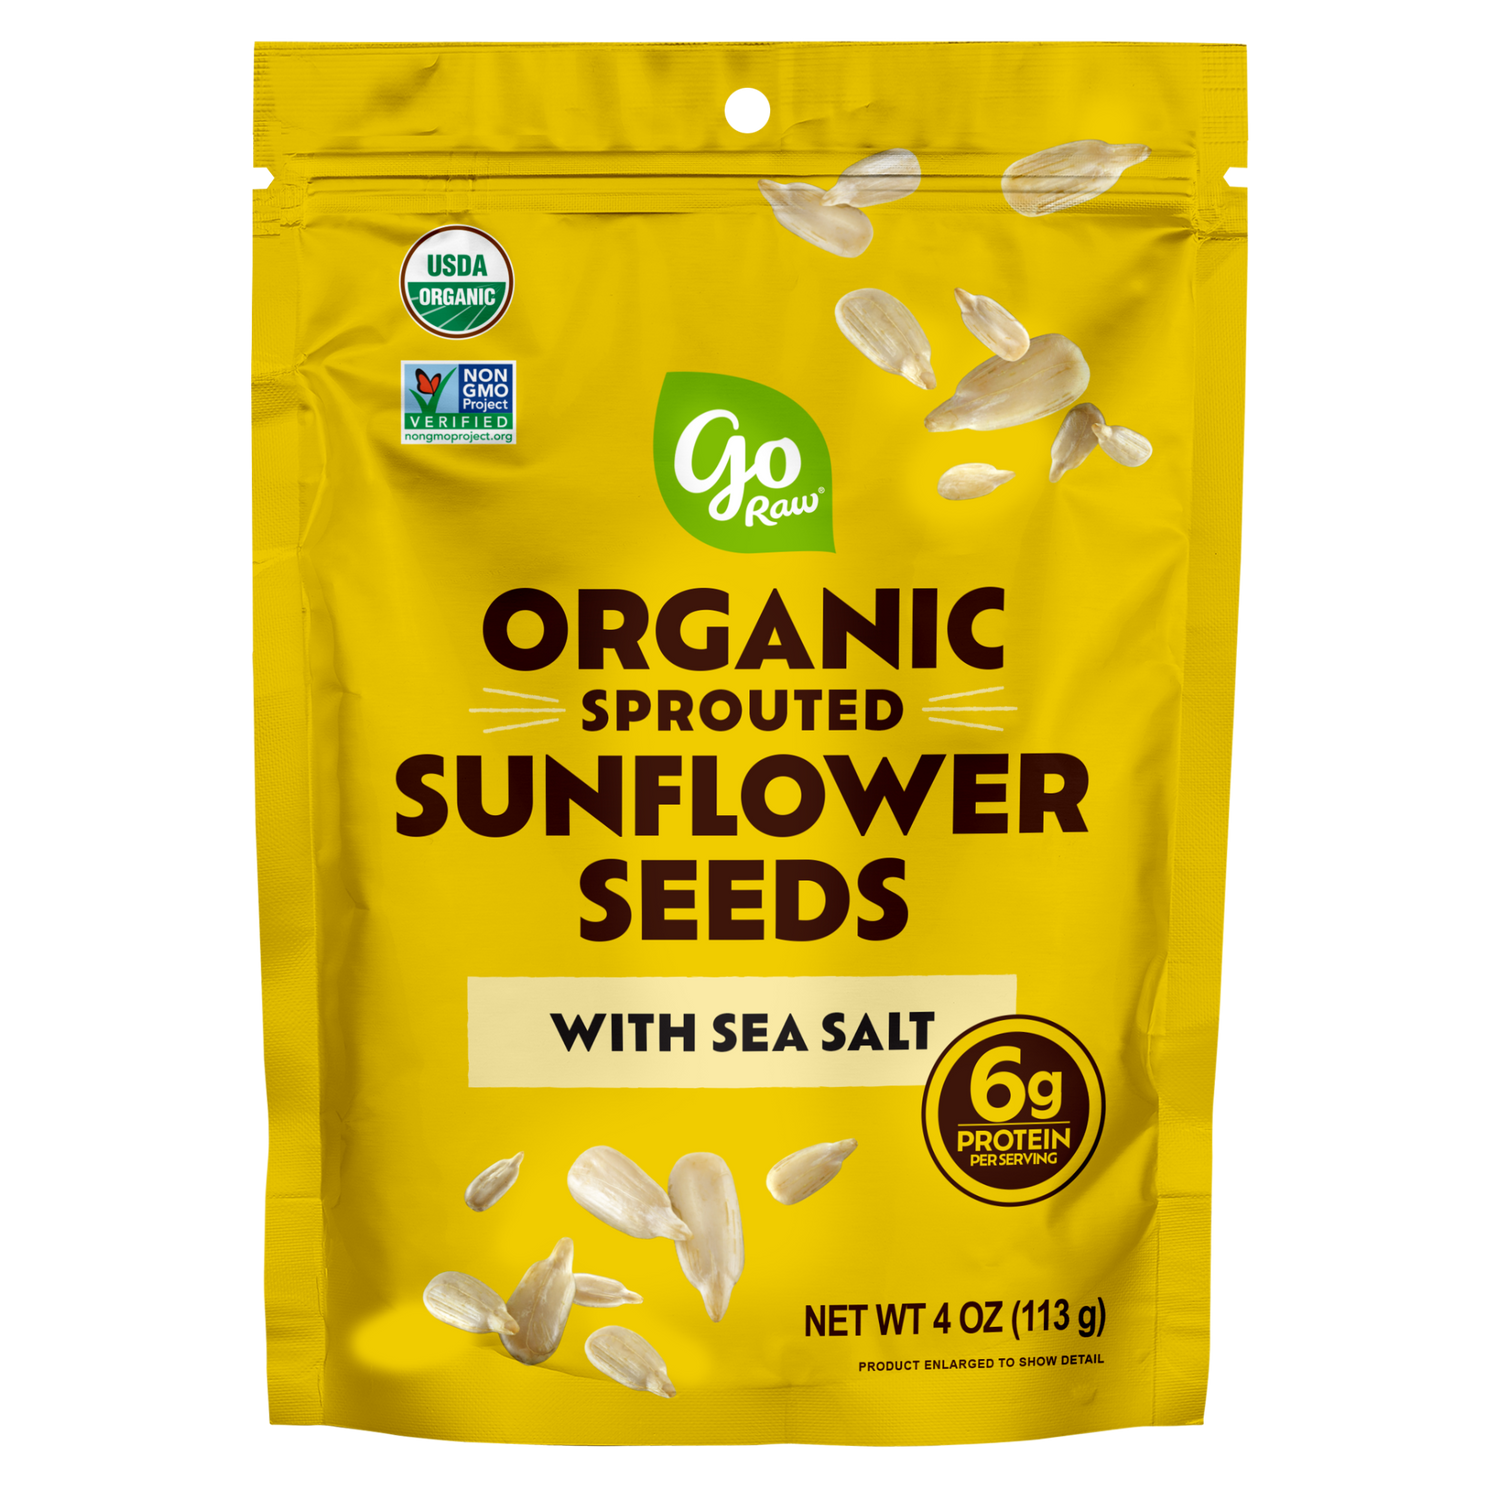 Sunflower Snacking Seeds - 10 Bags, 4oz Each